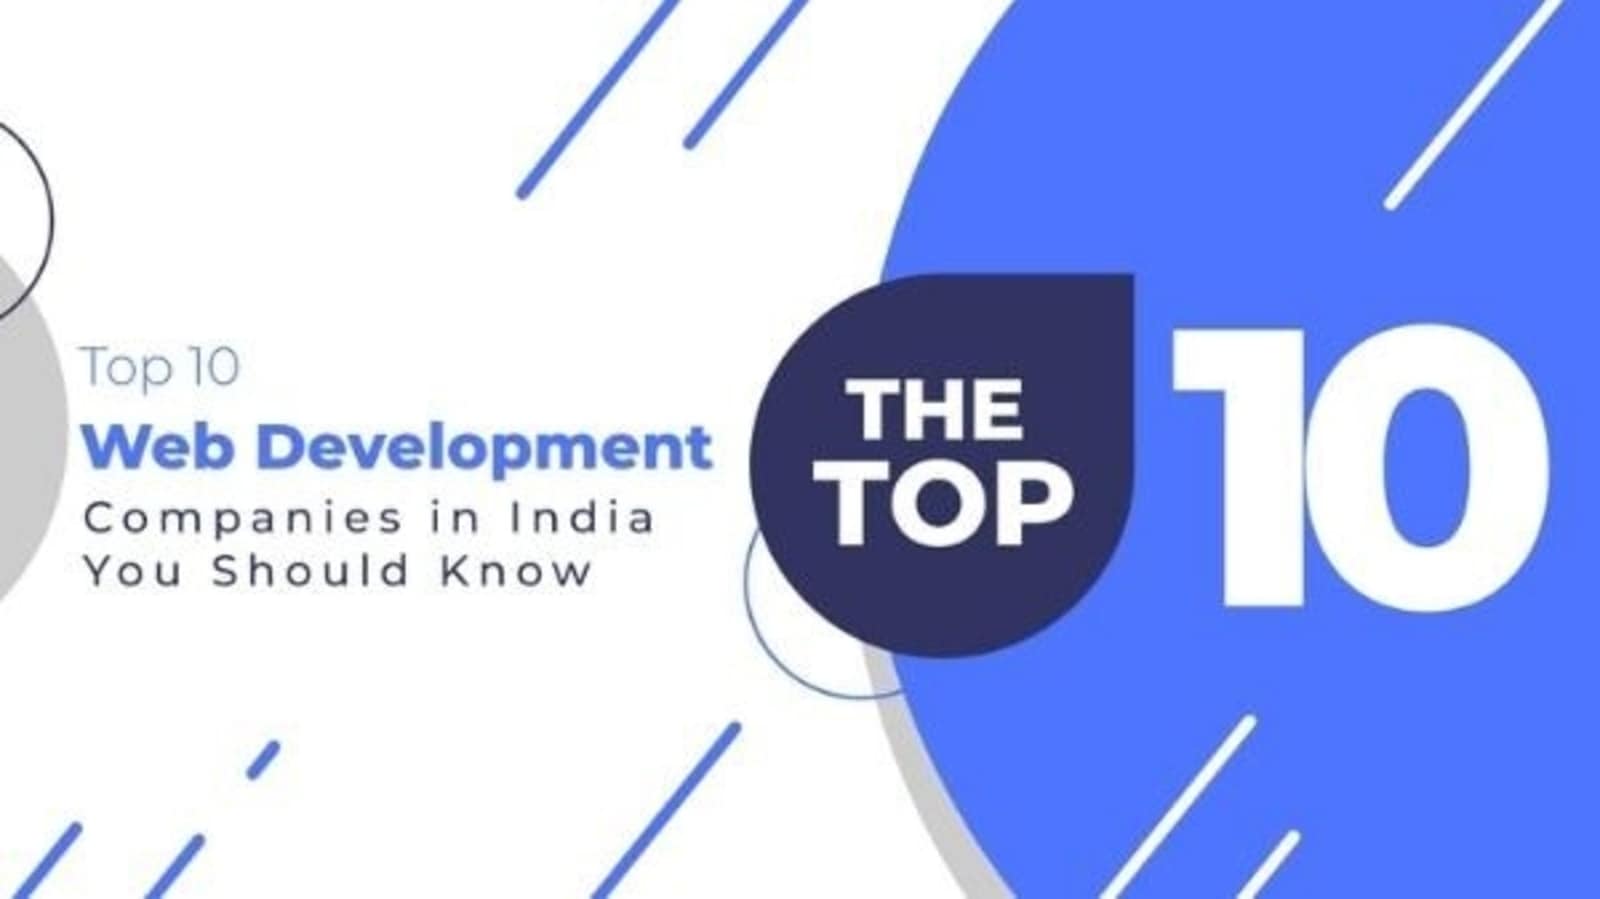 Top 10 Web Development Companies in India You Should Know